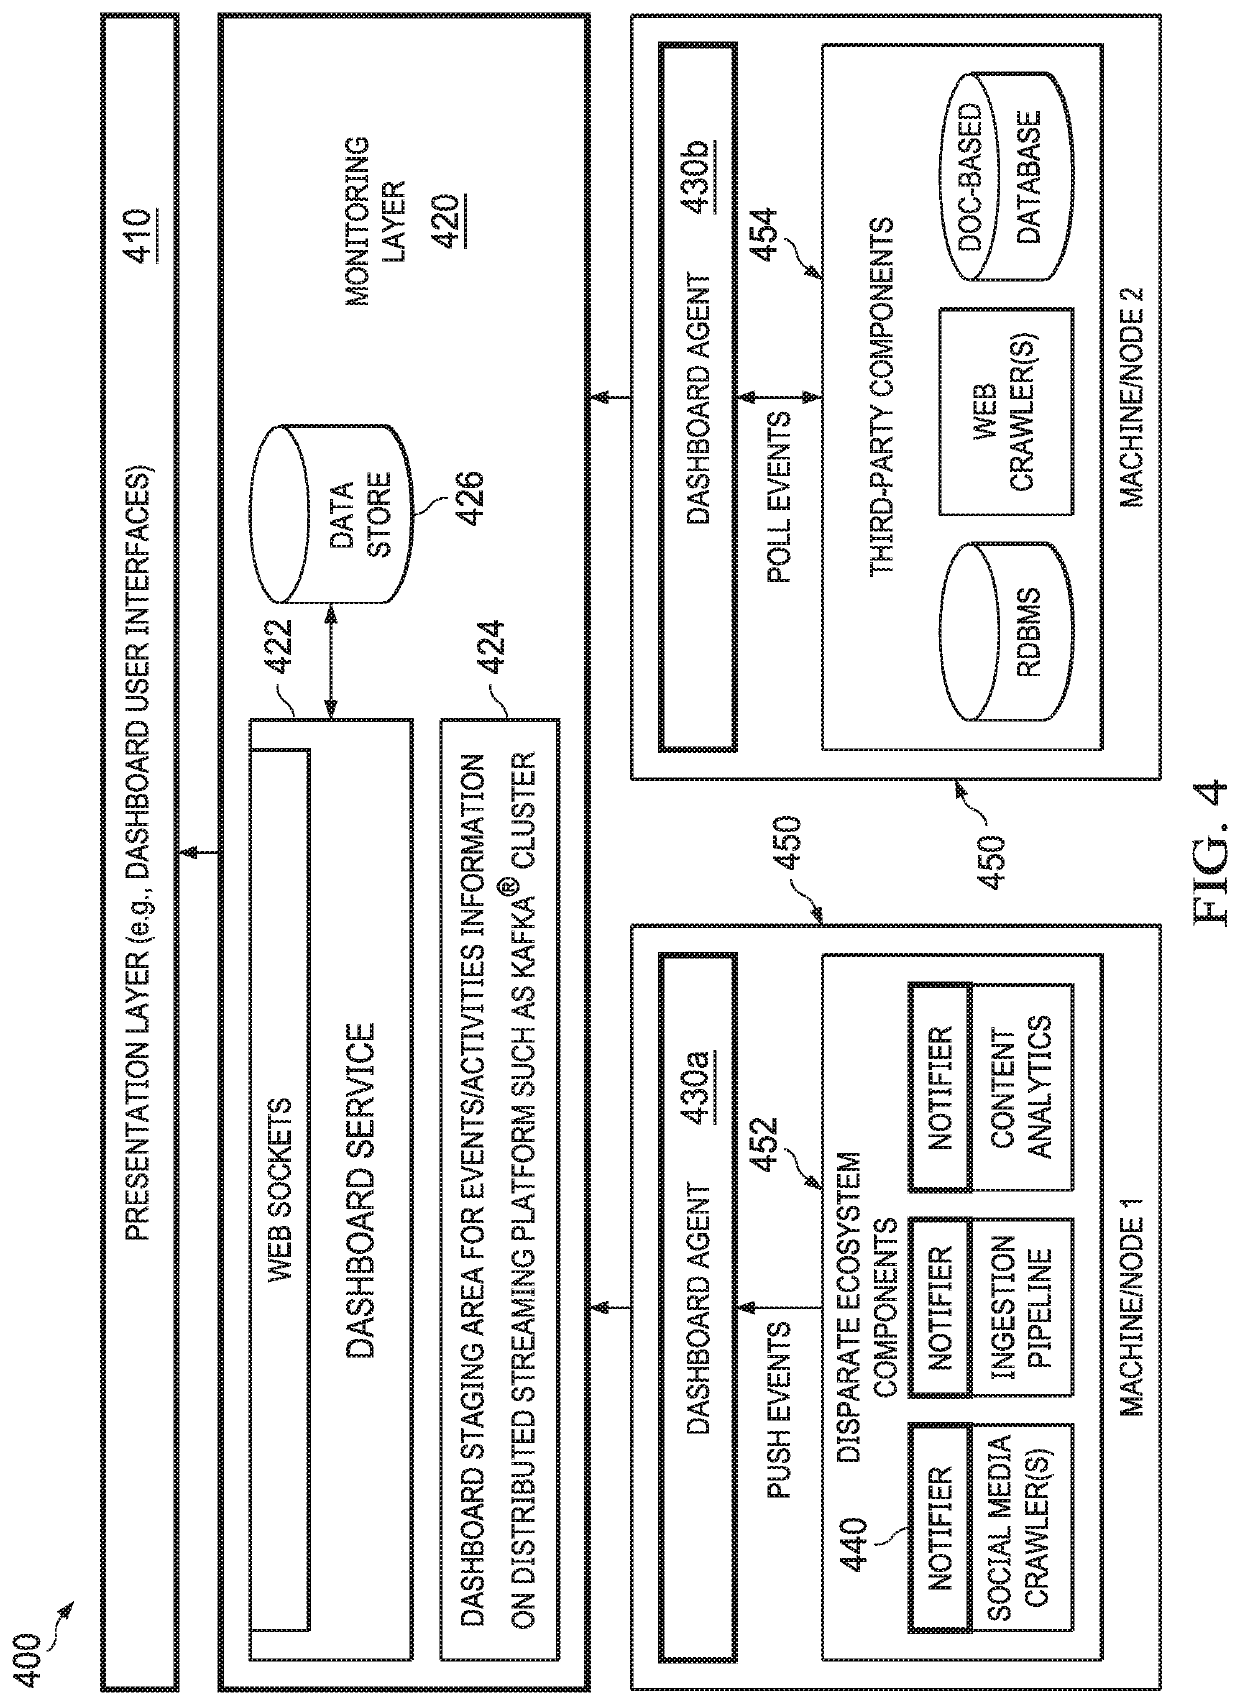 Real-time monitoring and reporting systems and methods for information access platform